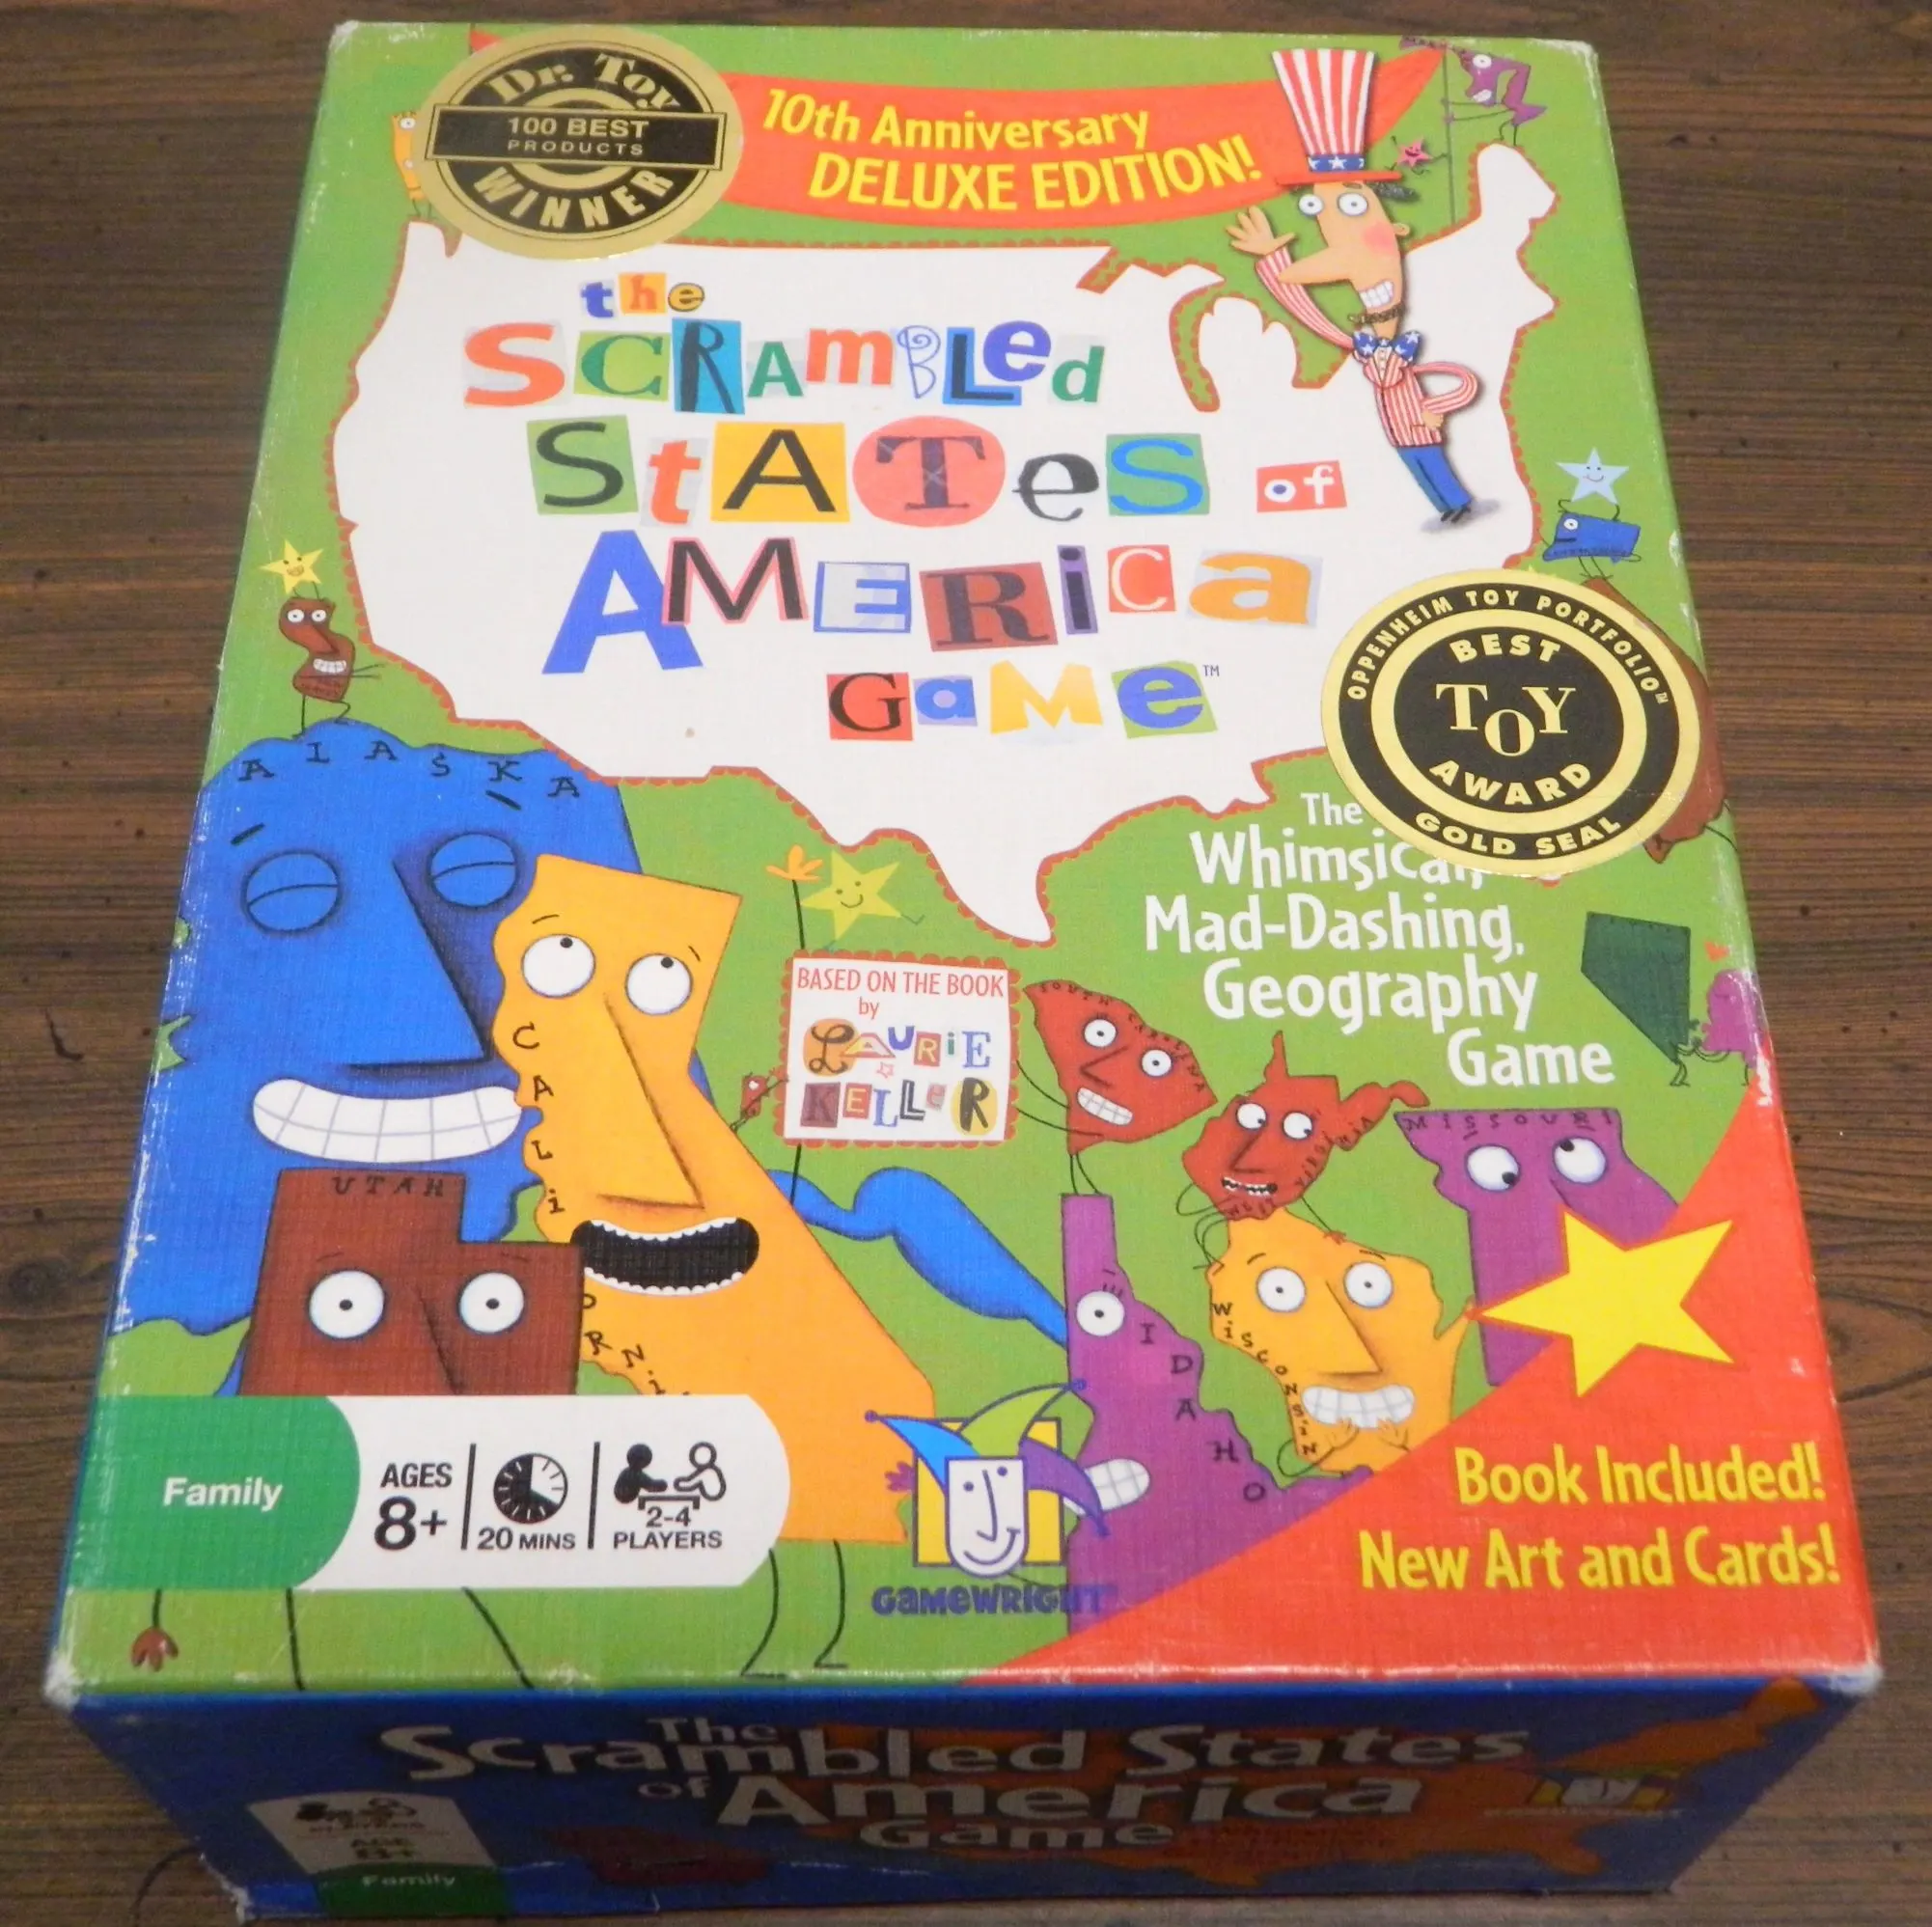 Box for Scrambled States of America Game